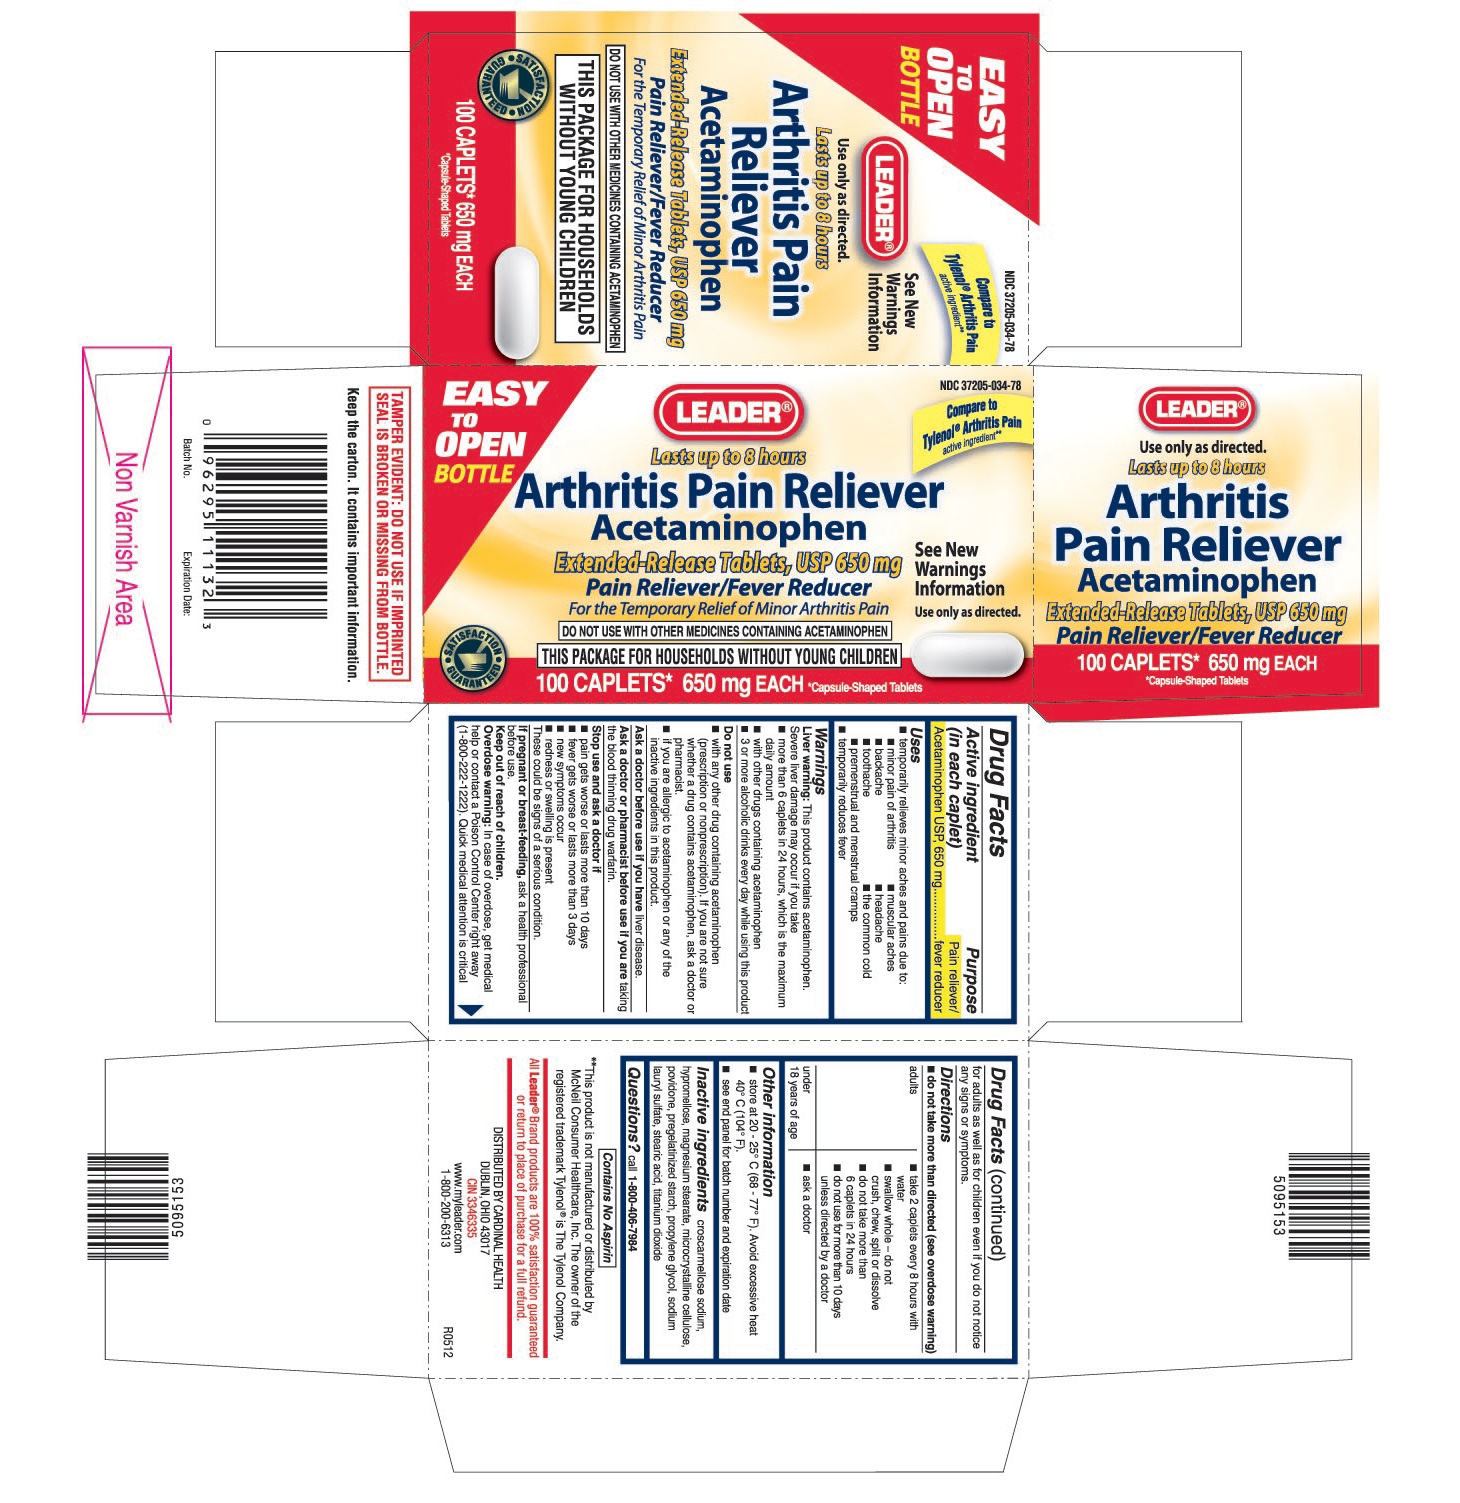 This is the 100 count bottle carton label for Leader Acetaminophen (Arthritis Pain Reliever) extended-release tablets, USP 650 mg.